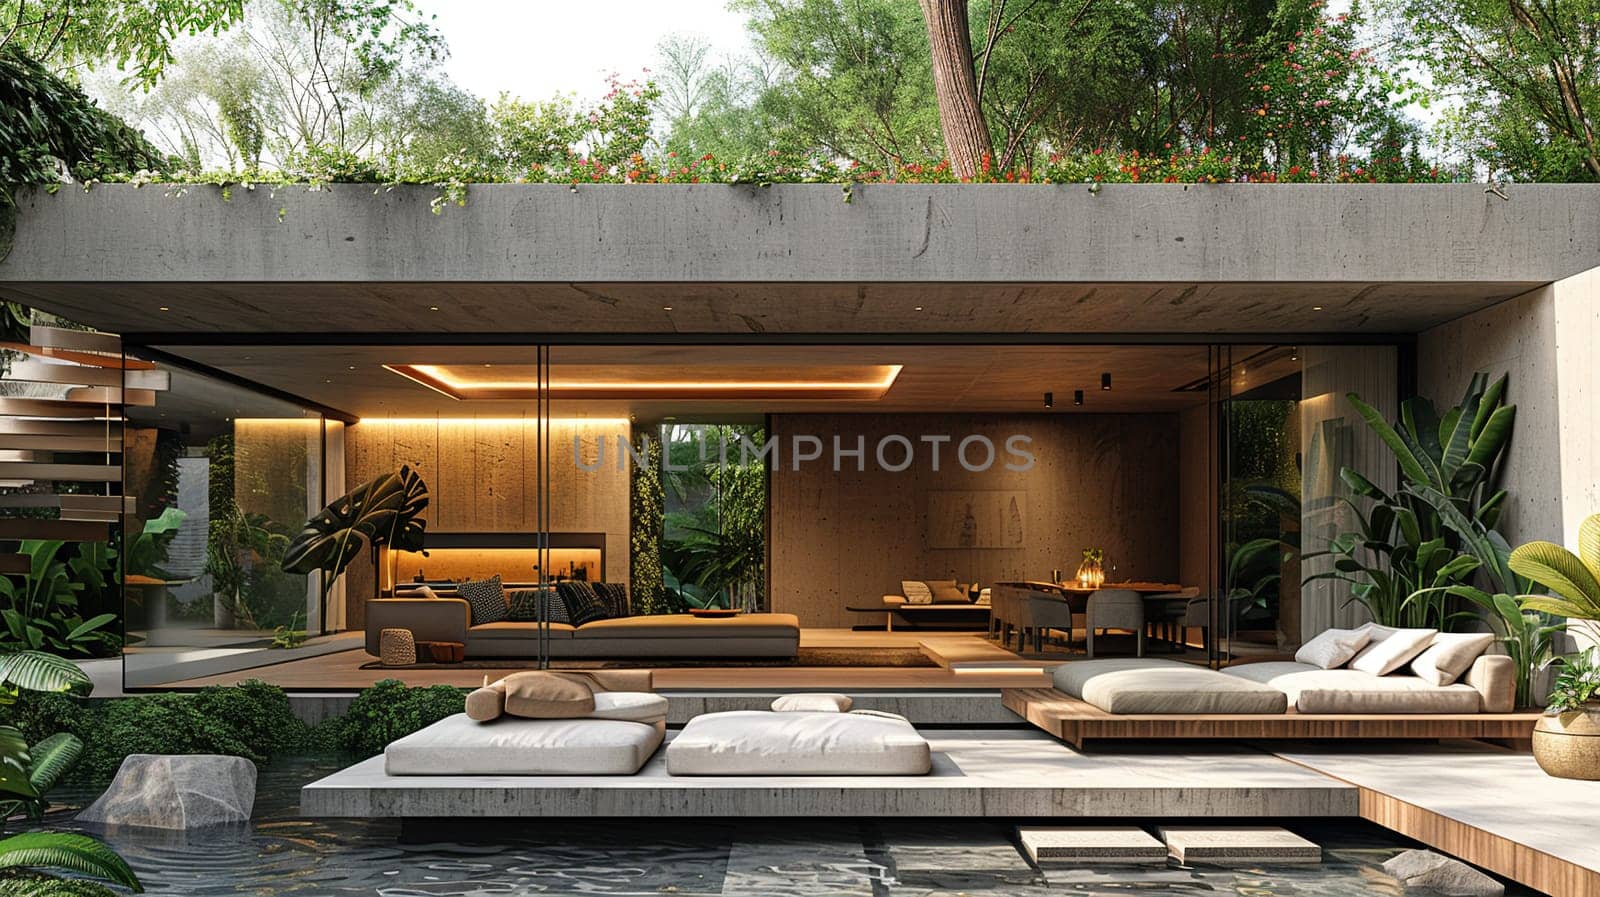 Modernist villa with open spaces, natural light, and minimalist decor